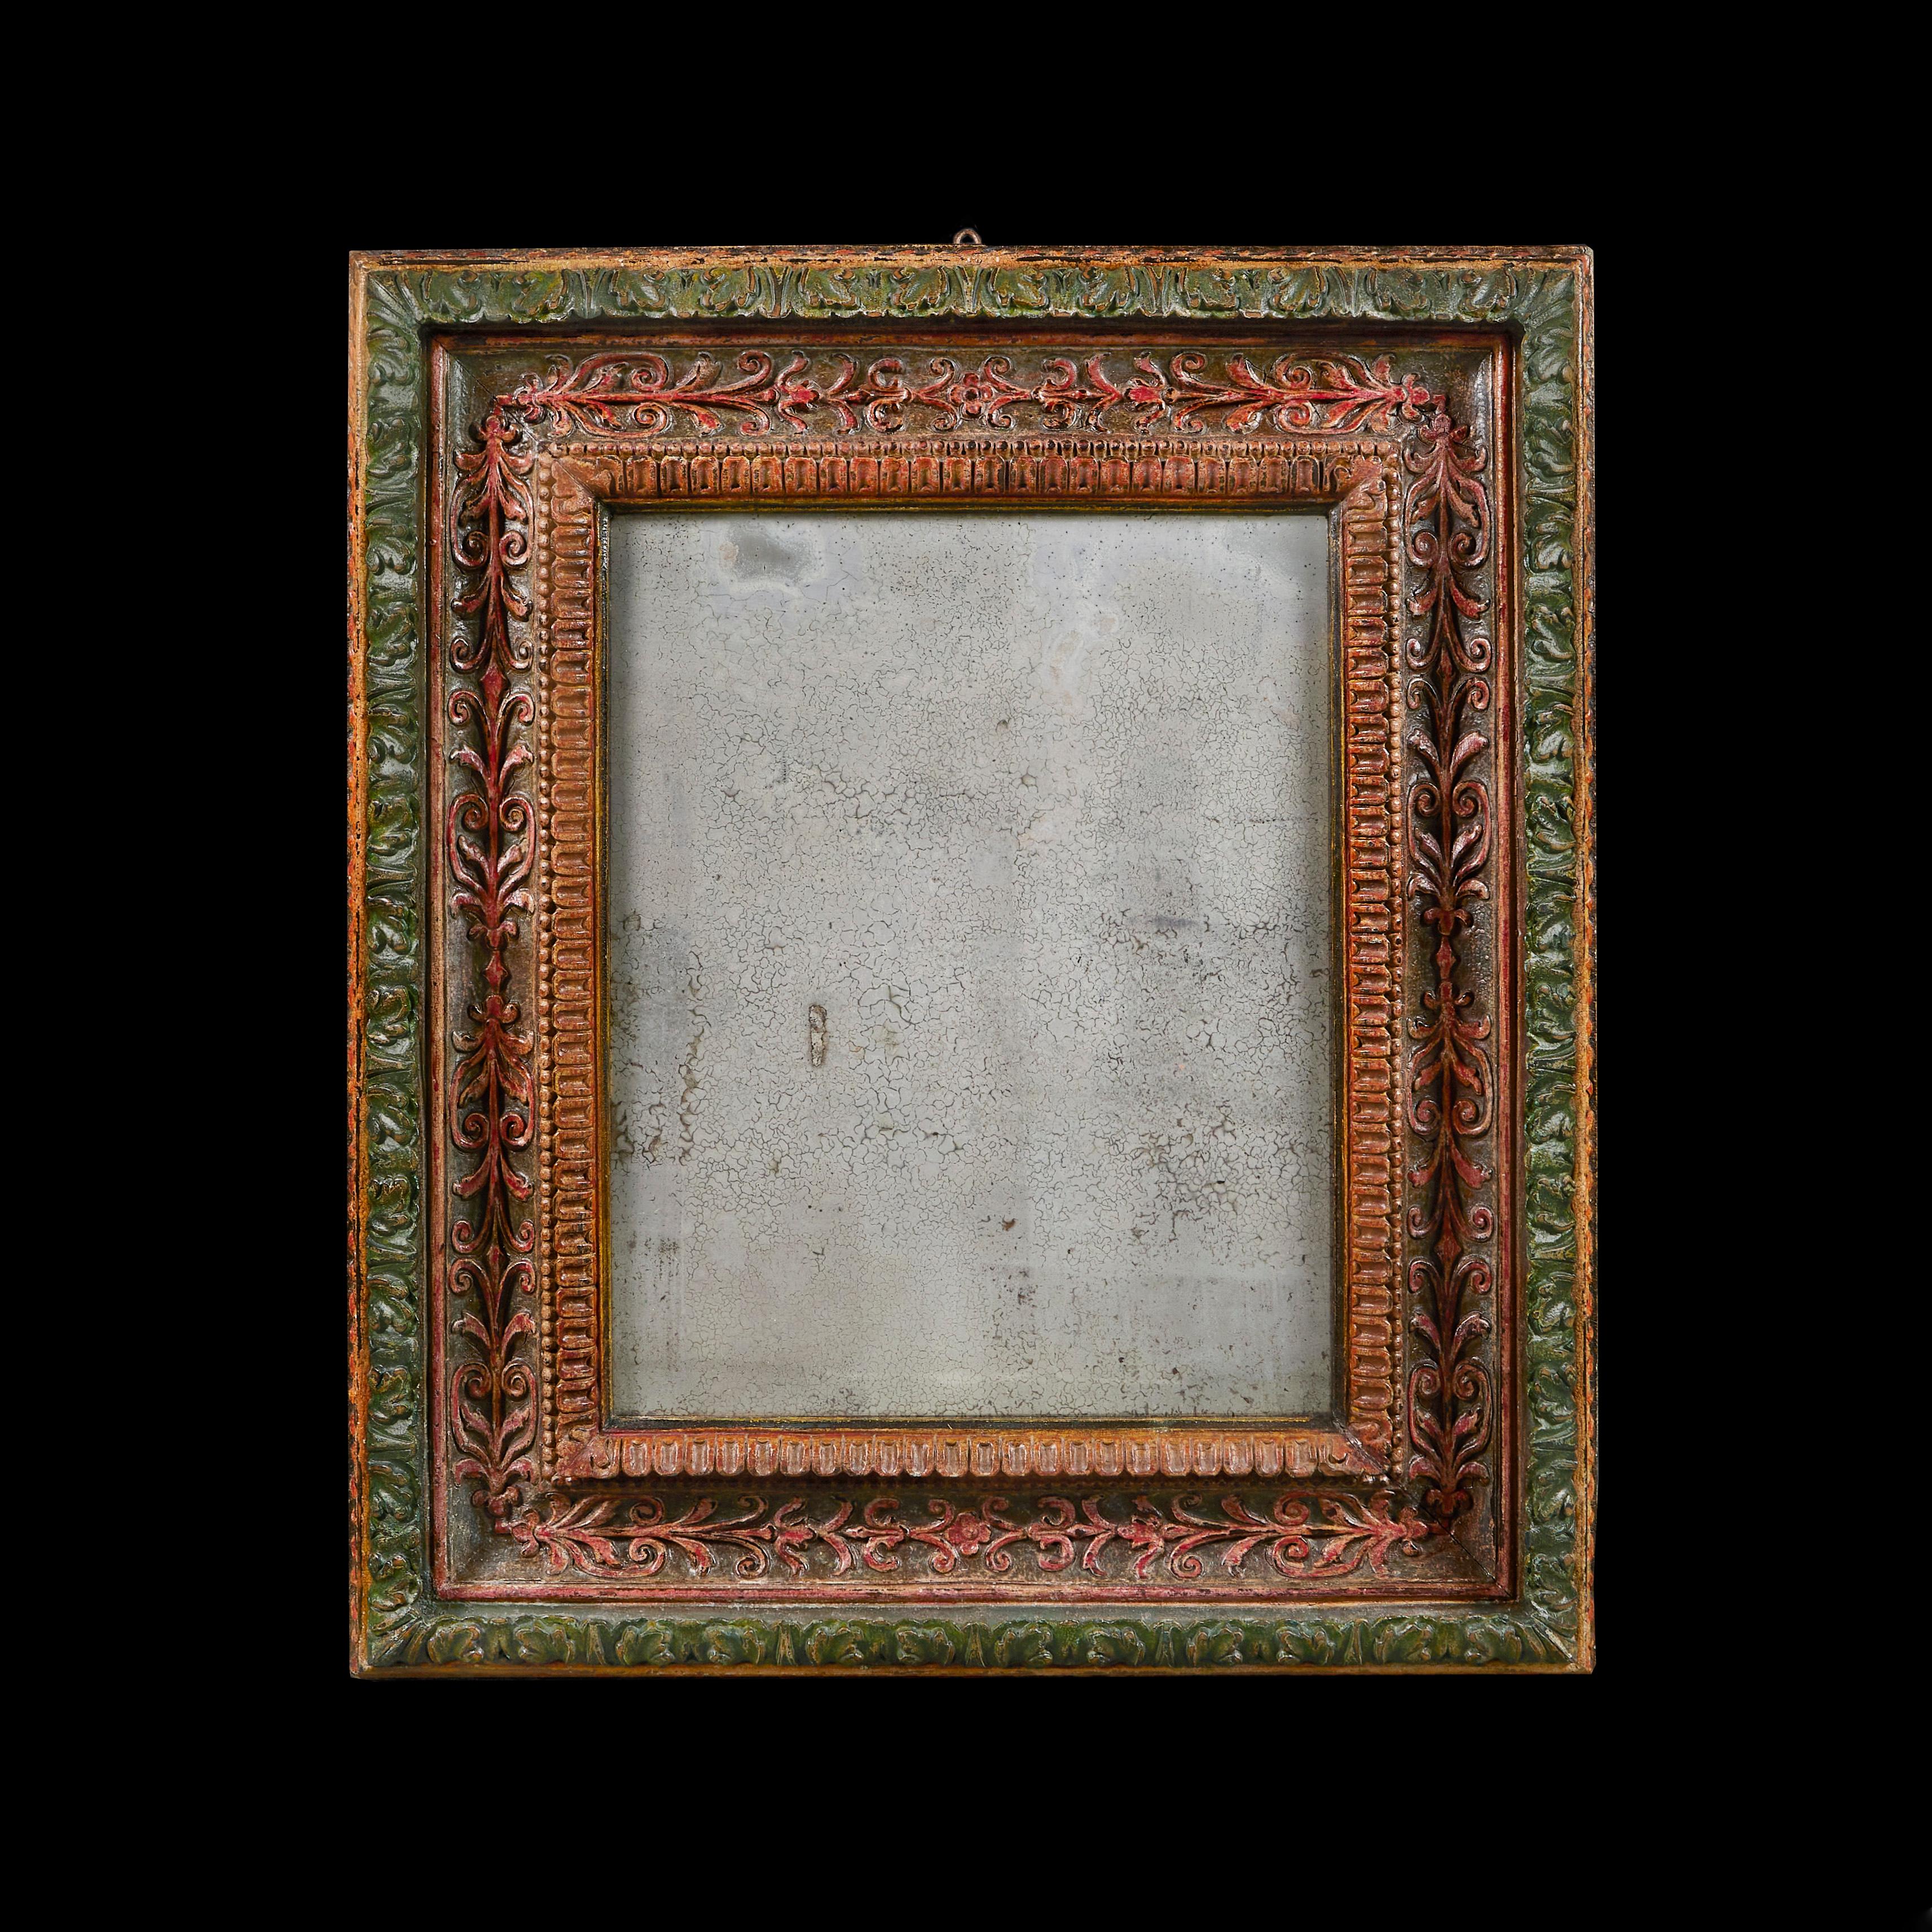 Italy, Rome, circa 1890

An unusual late nineteenth century Roman pier mirror retaining its original paint, the borders decorated with Pompeiian reds and greens, carved throughout with foliate designs.

Height 78.00cm
Width 68.00cm